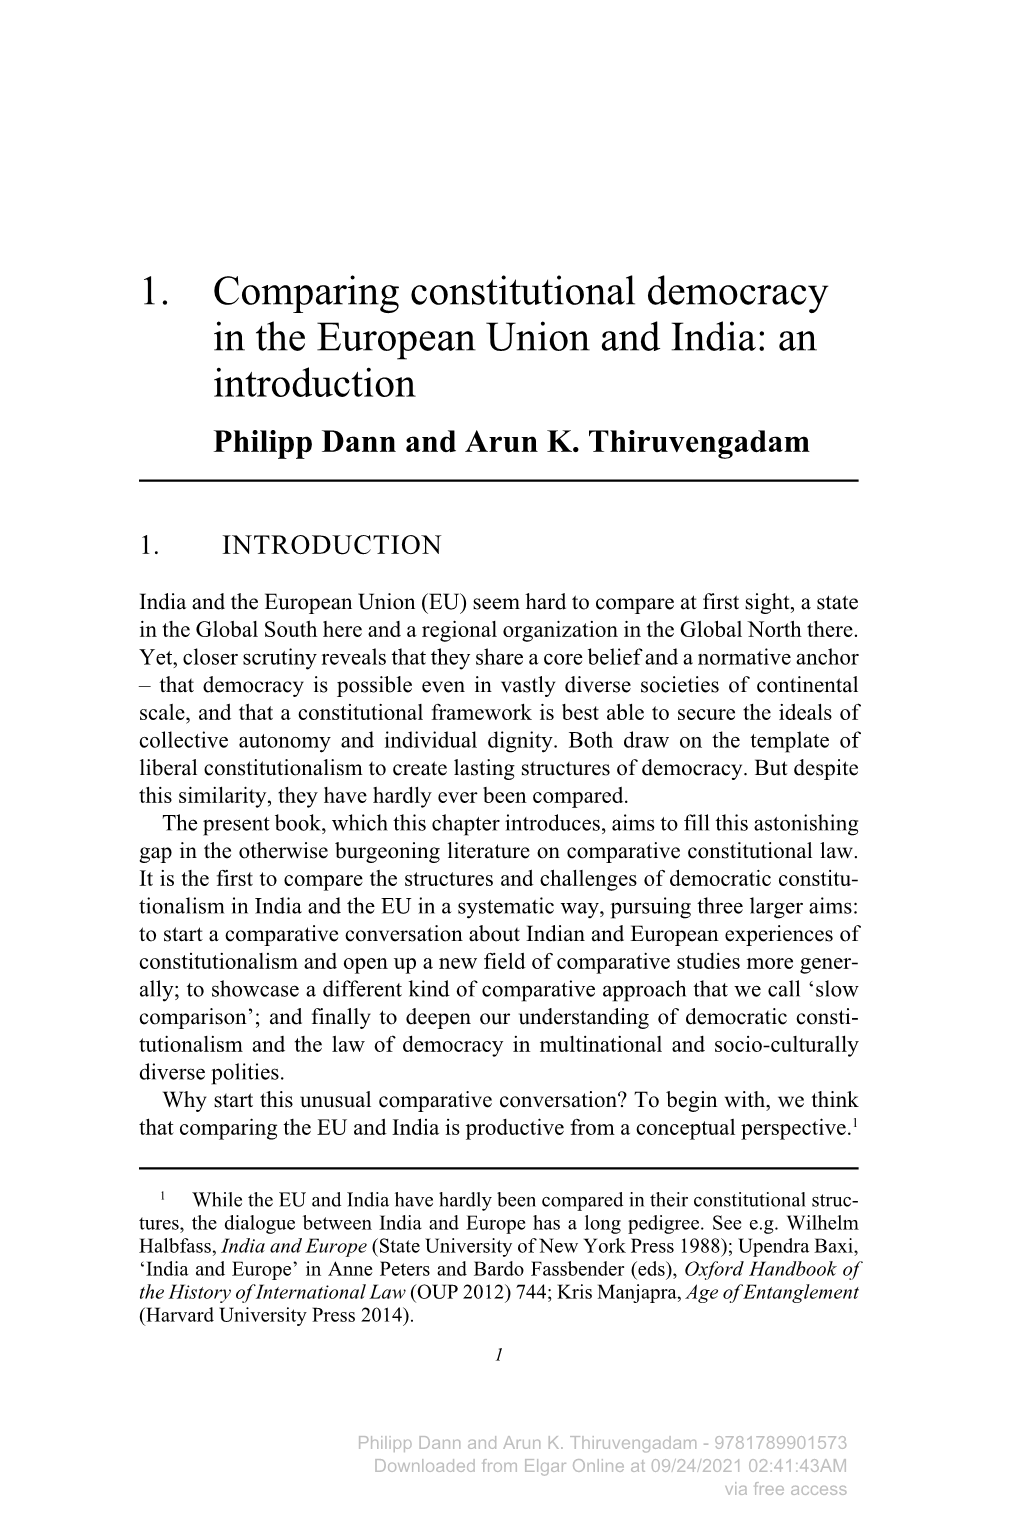 Downloaded from Elgar Online at 09/24/2021 02:41:43AM Via Free Access 2 Democratic Constitutionalism in India and the European Union